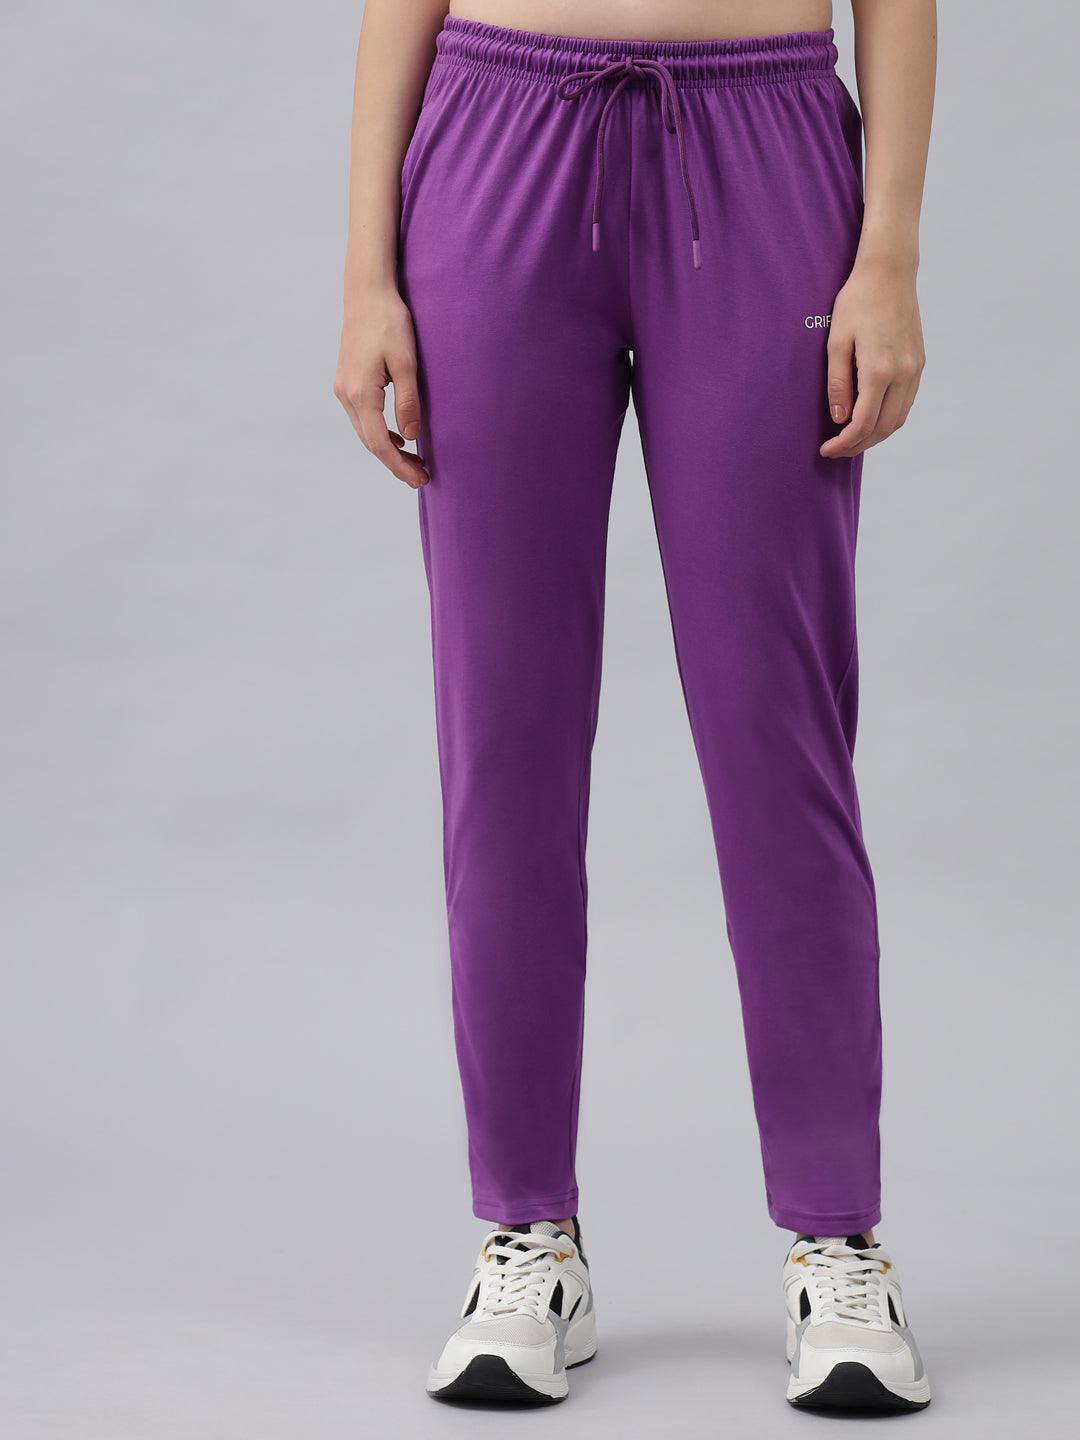 GRIFFEL Women Basic Solid Regular Fit Purple Trackpant - griffel